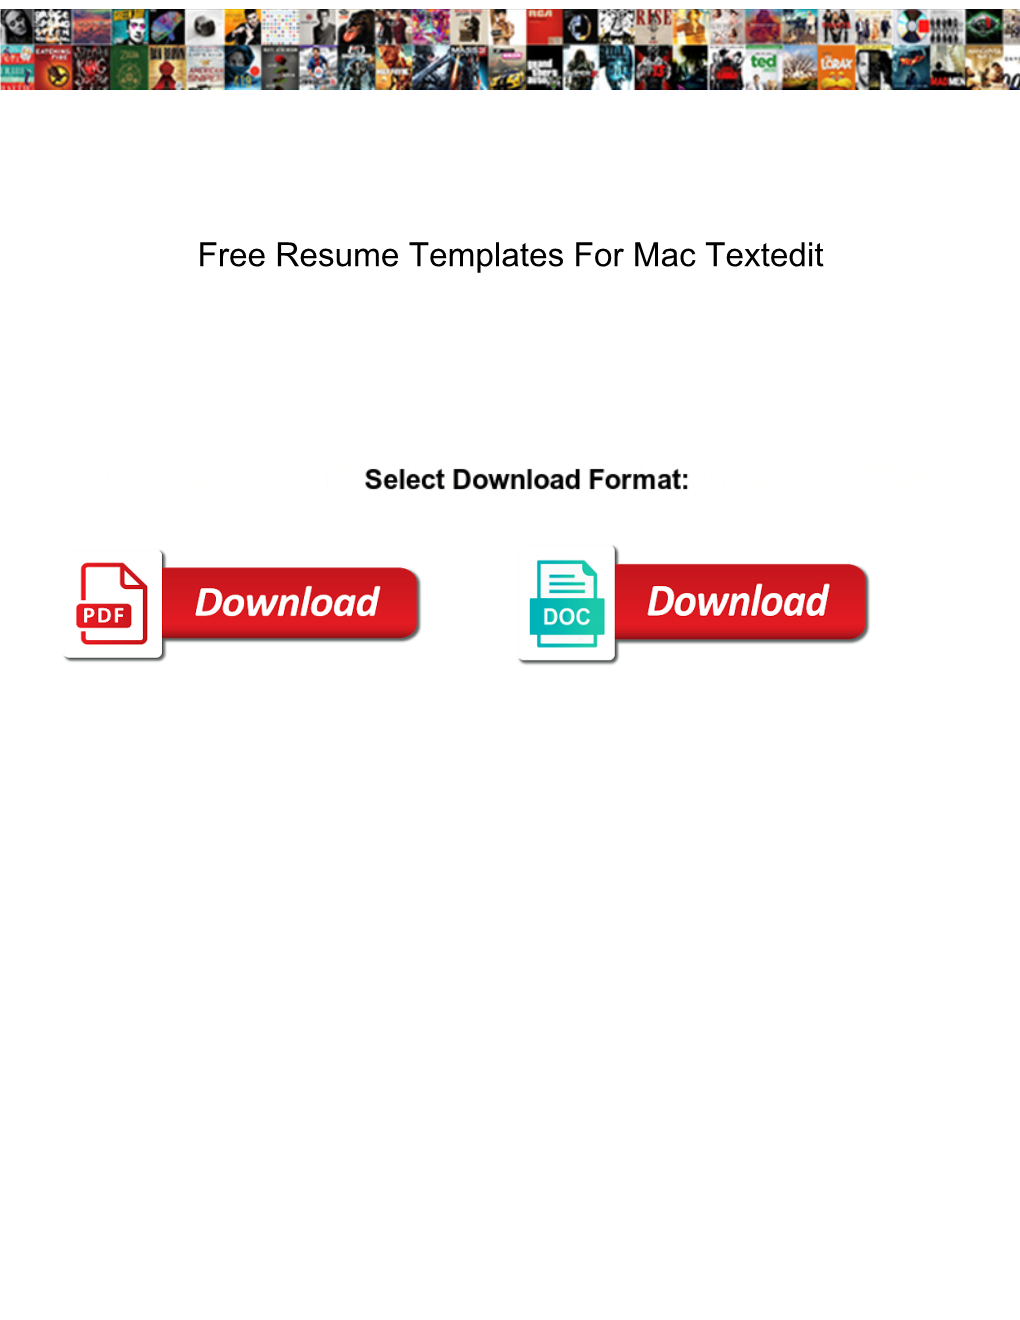 Free Resume Templates for Mac Textedit